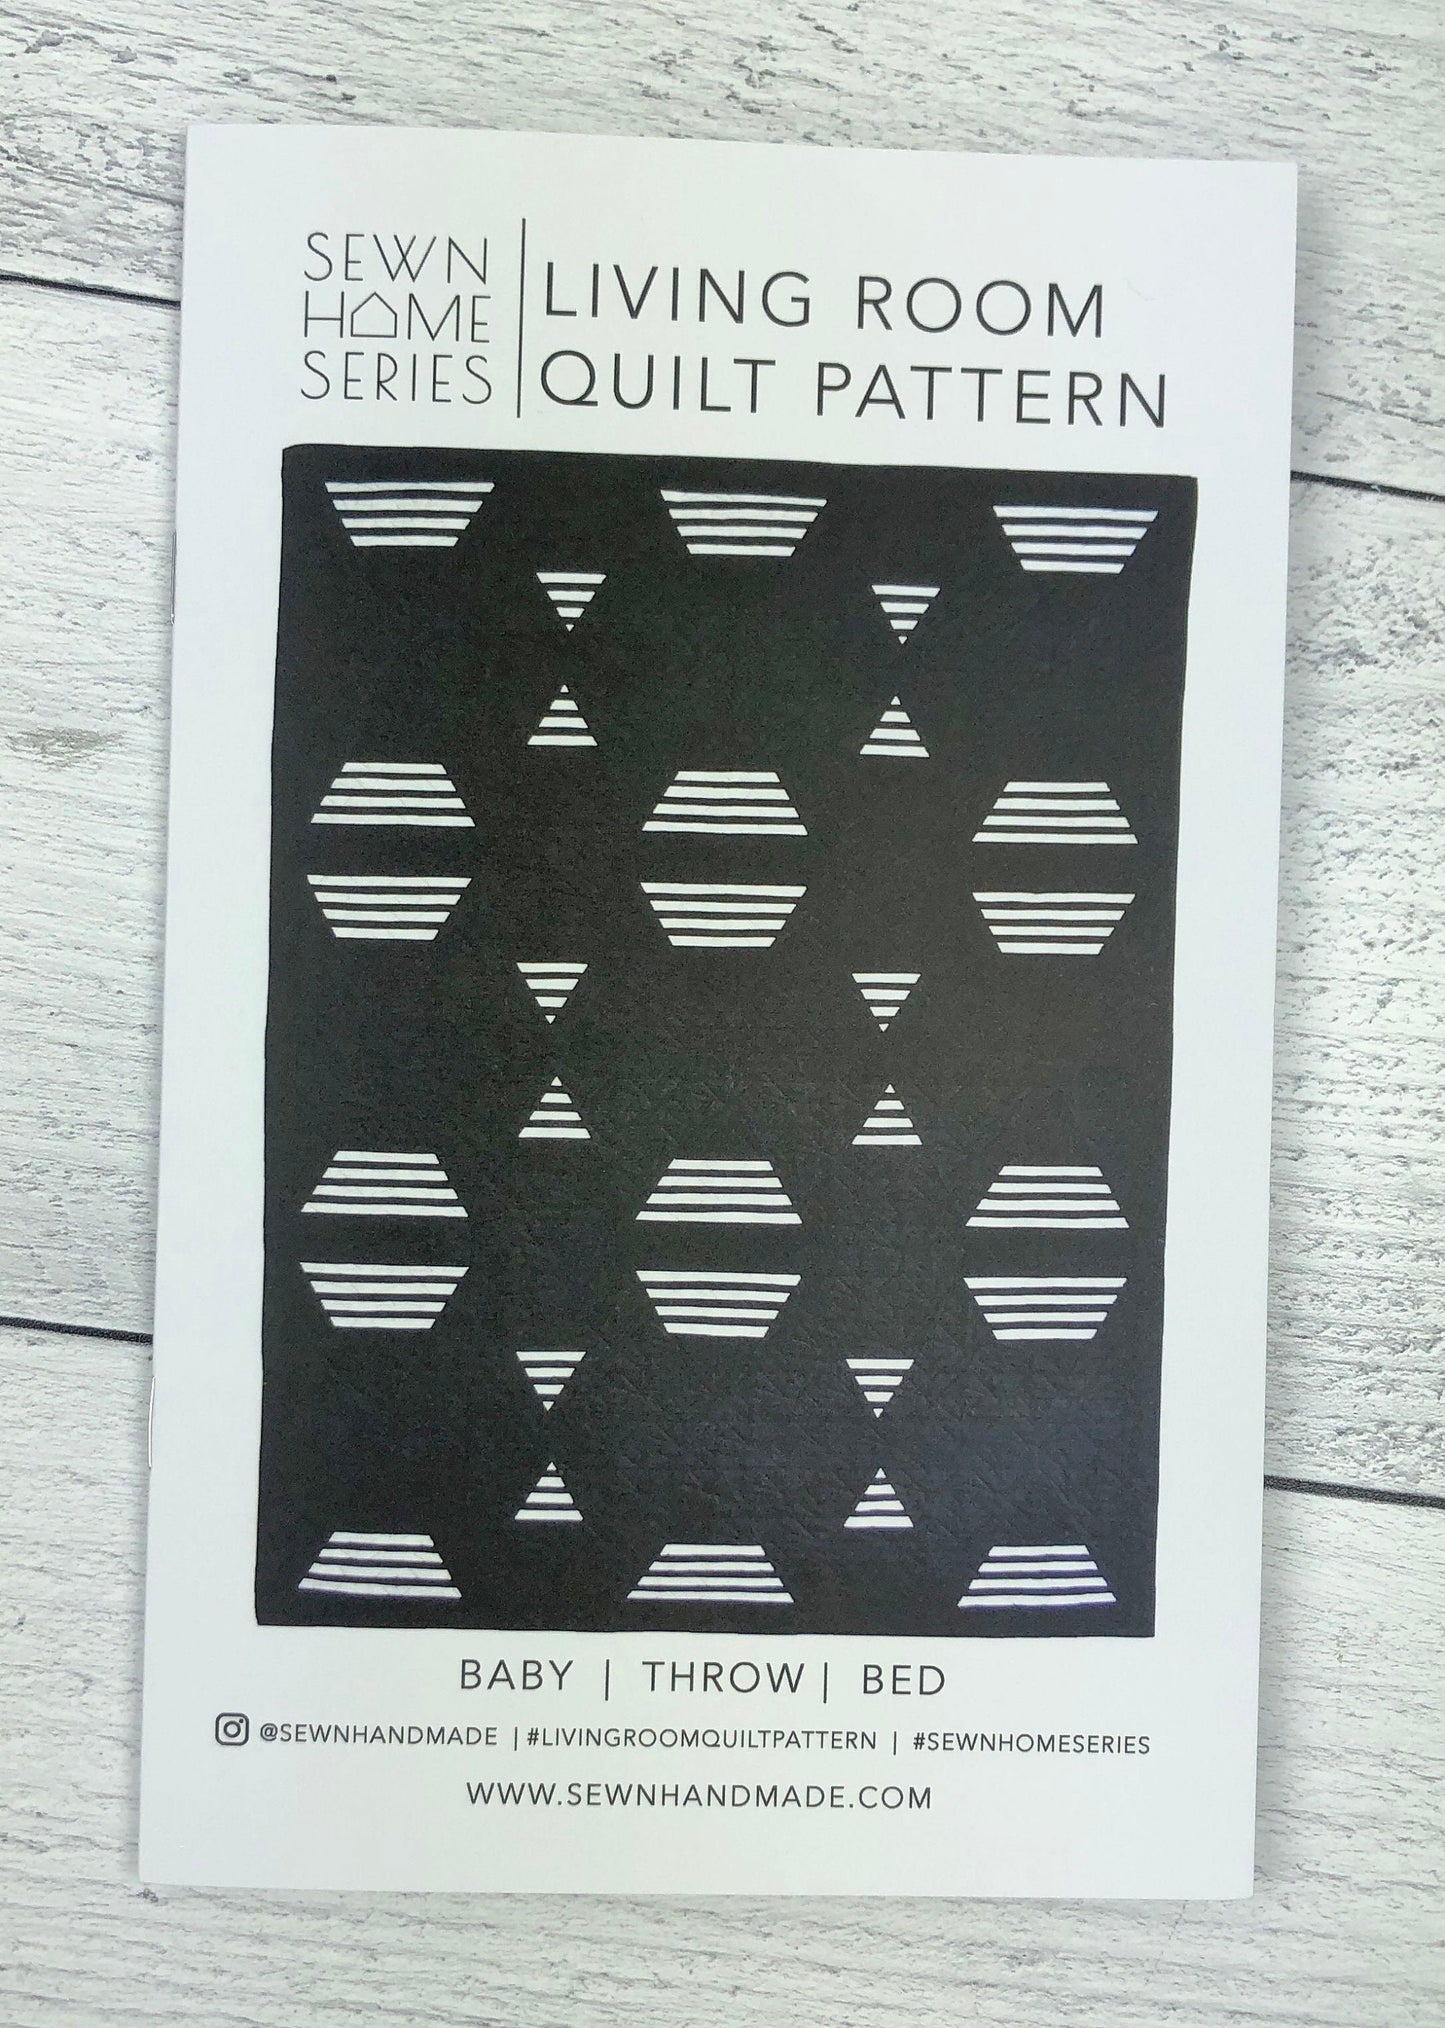 Living Room Quilt Pattern by Sewn Handmade